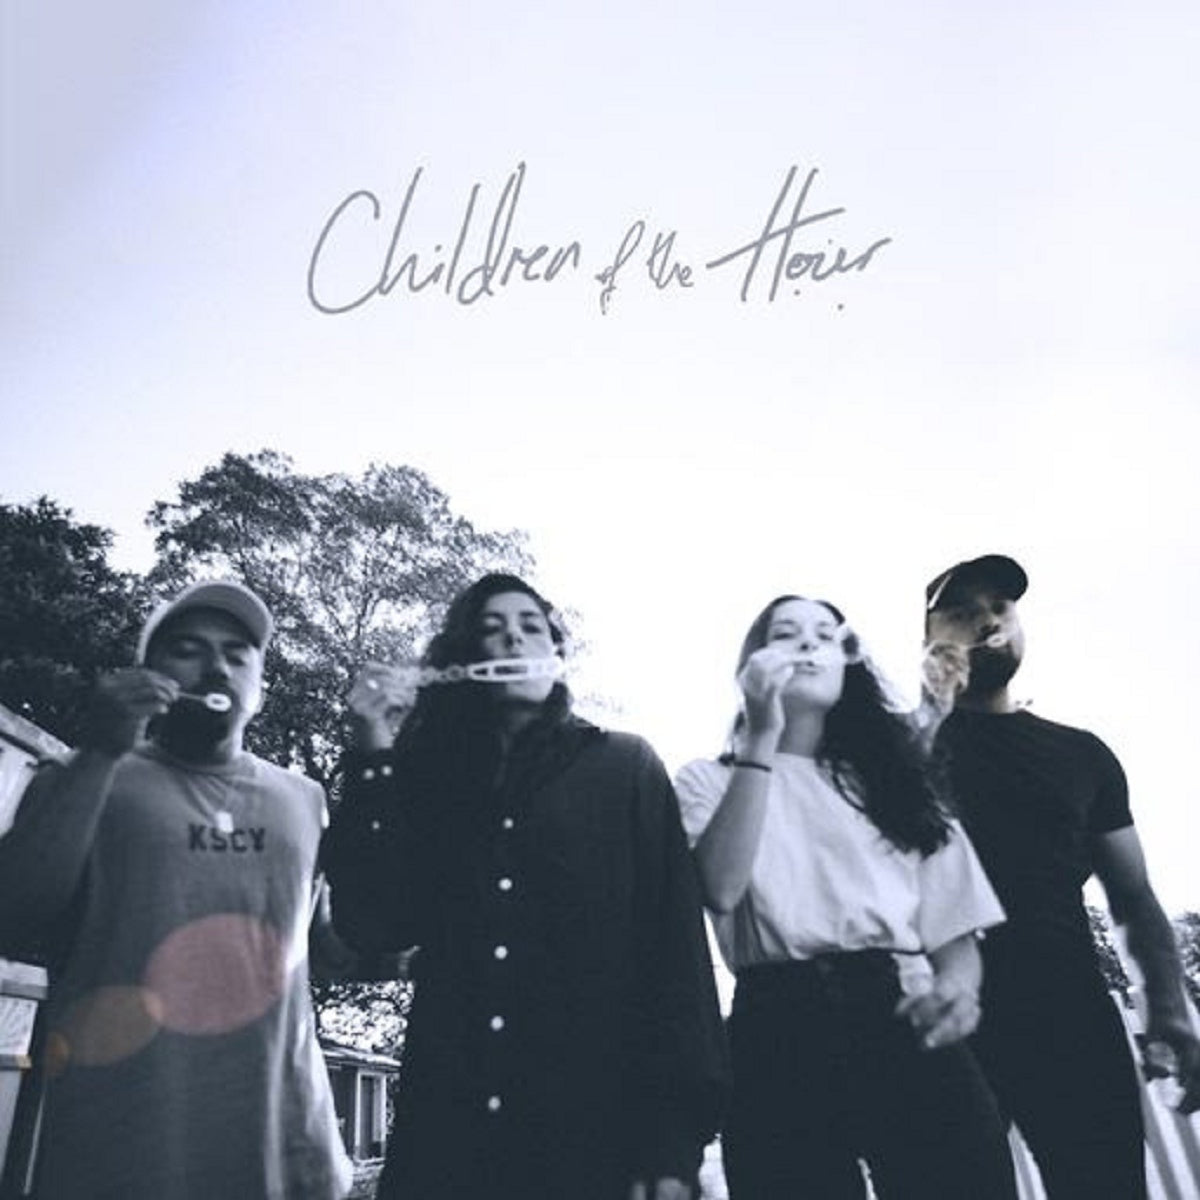 Dande and the Lion - 'Children of the Hour'